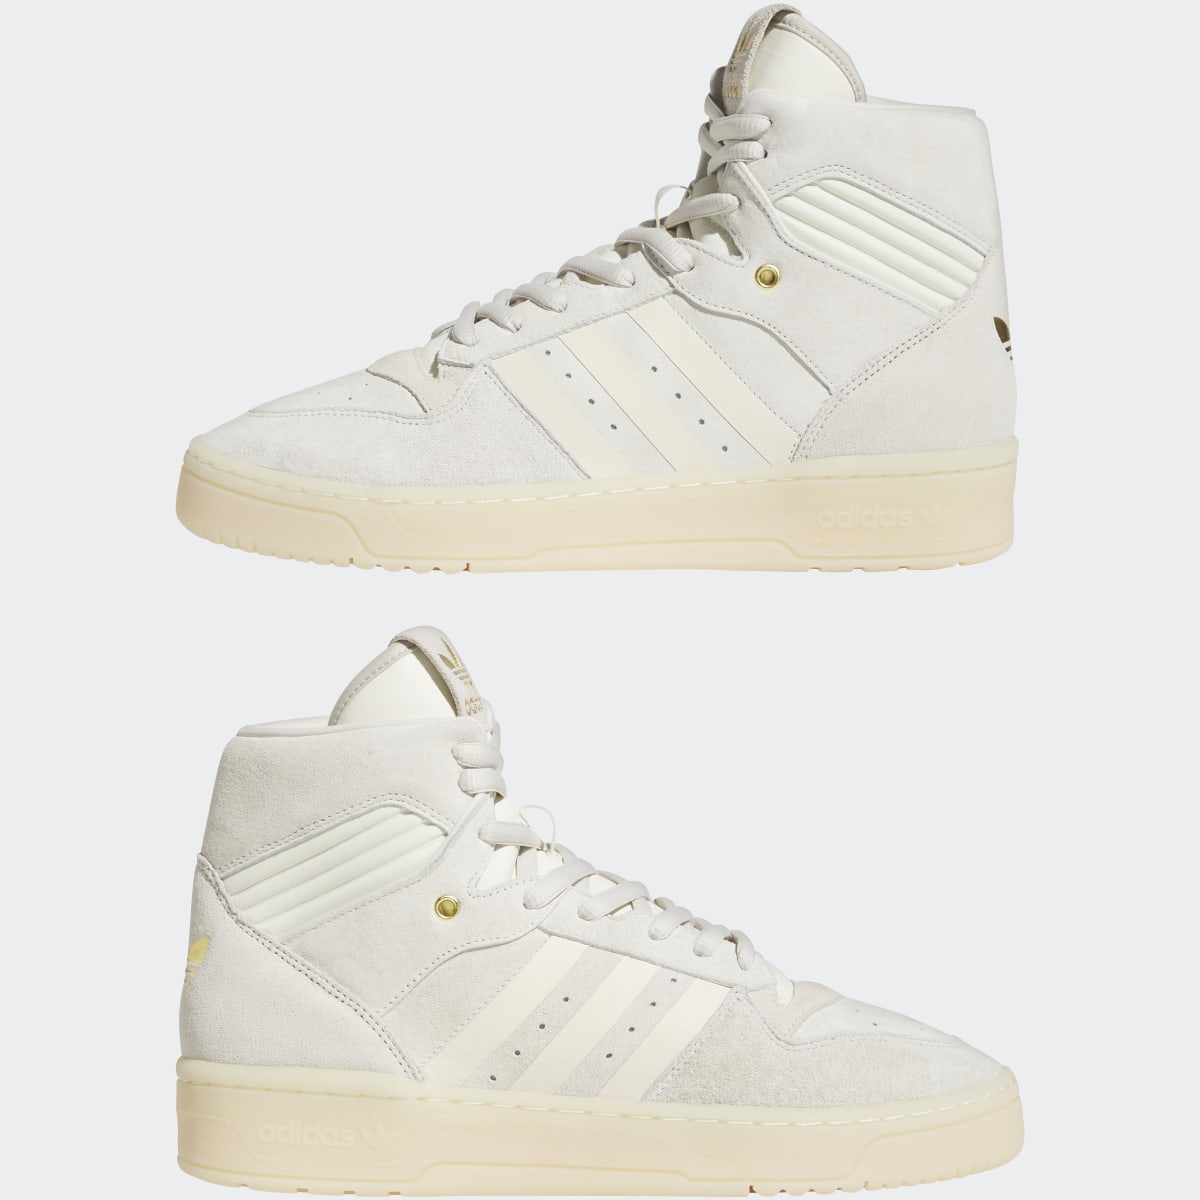 Adidas Rivalry High Shoes. 8